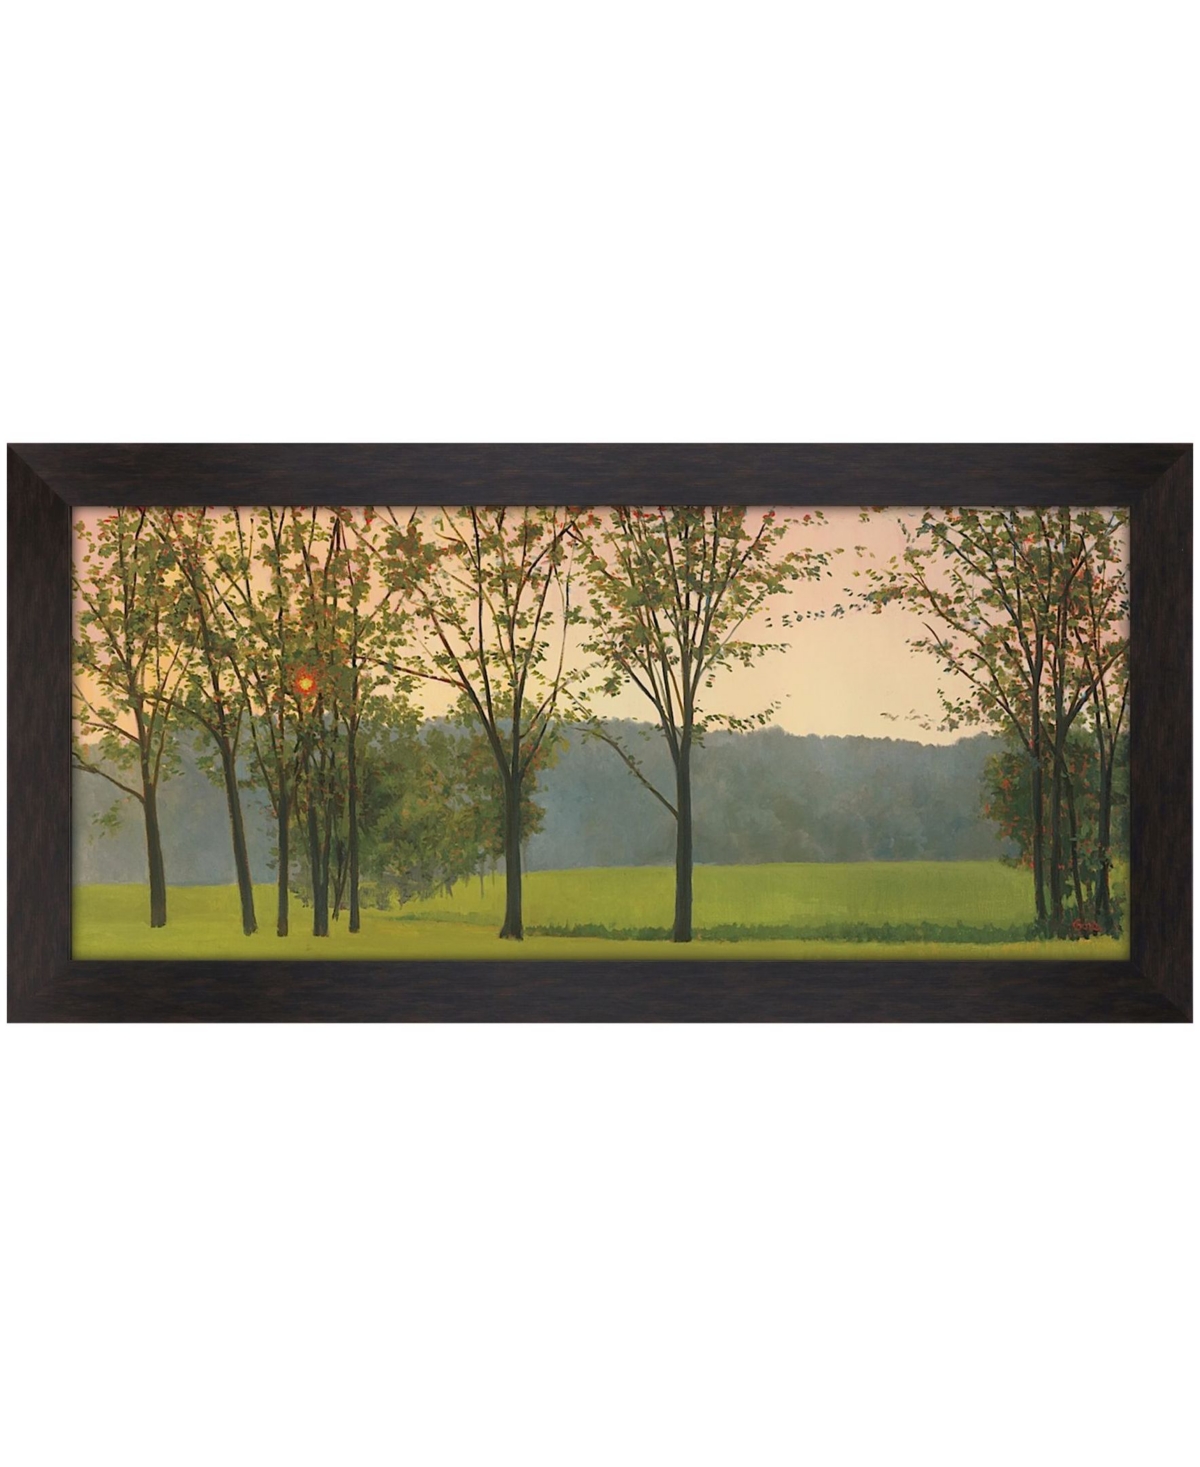 Paragon Picture Gallery Hazy Woodstock Framed Art In Green